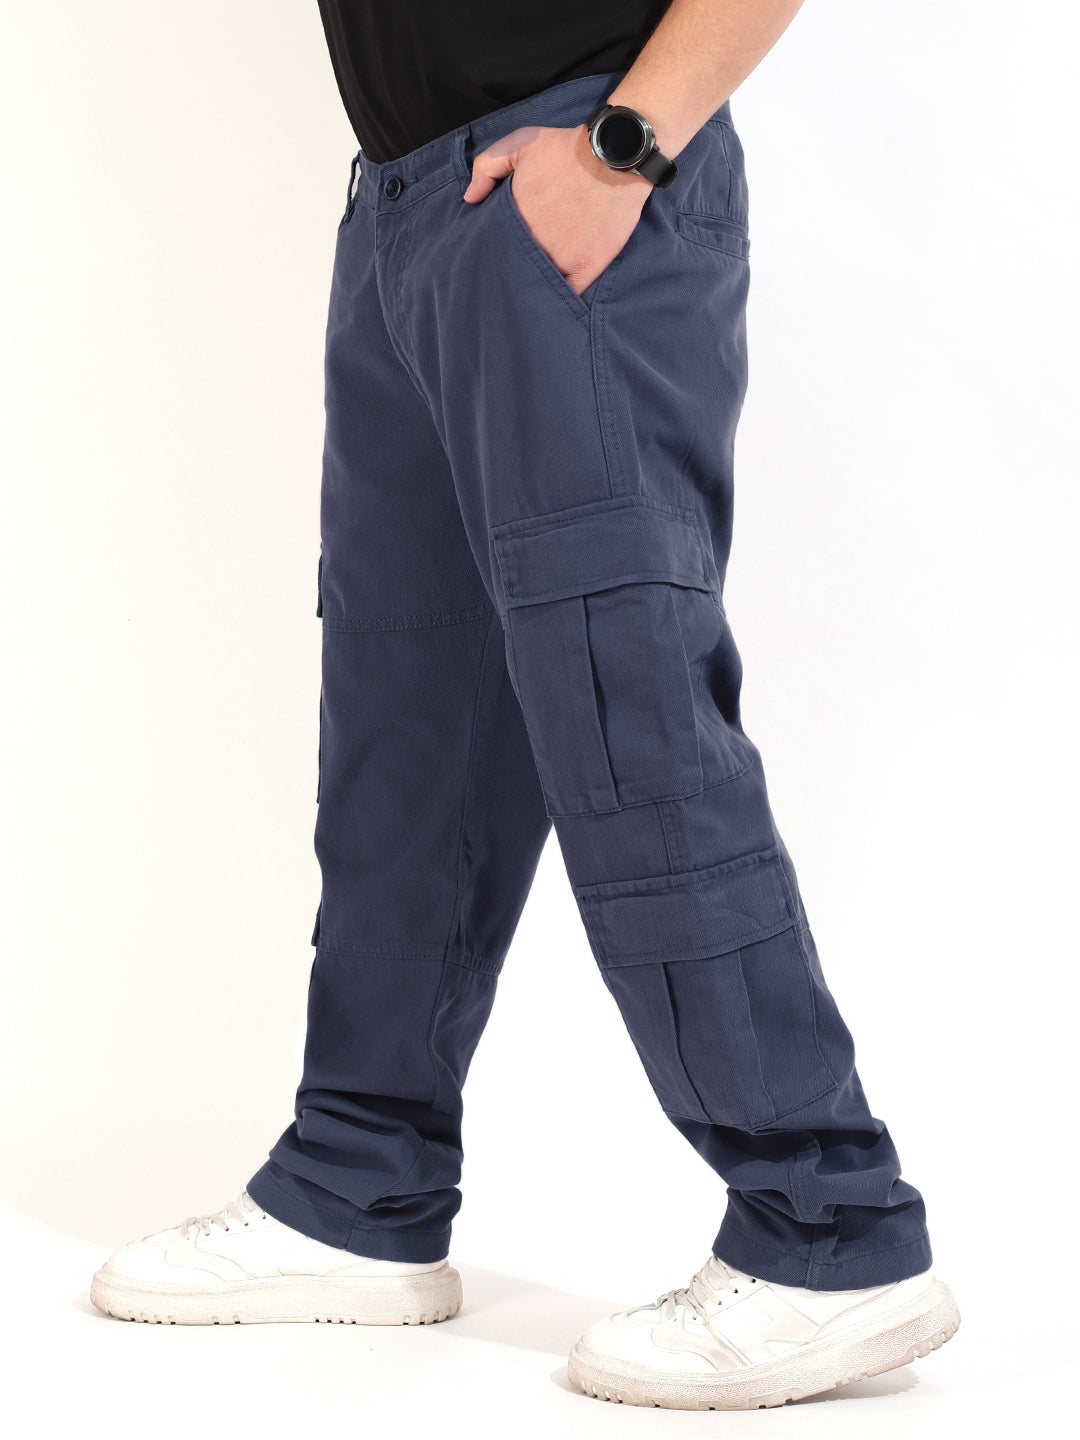 Ash Grey Cotton Drill Baggy Fit 8 pocket Cargo